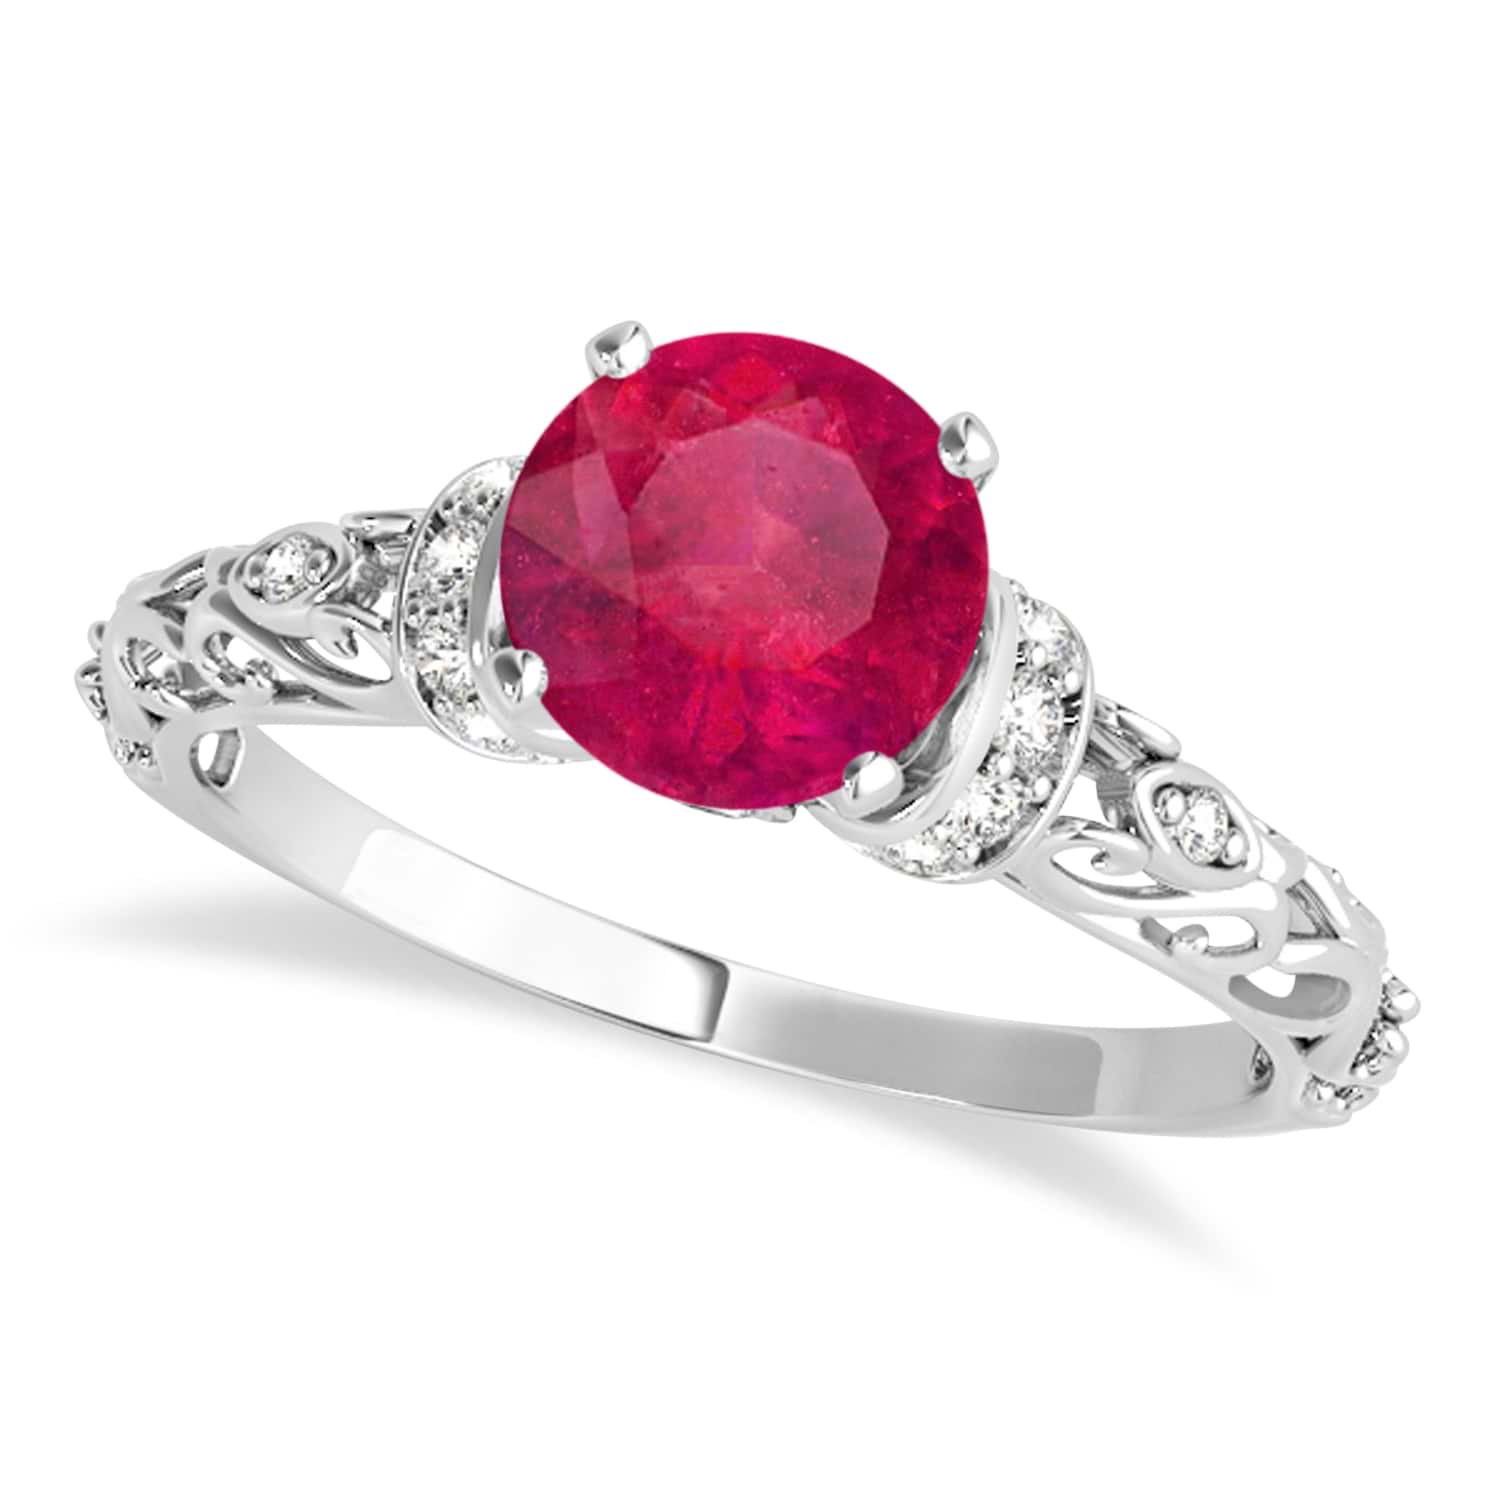 Ruby & Diamond Antique Style Engagement Ring 14k White Gold (1.12ct)